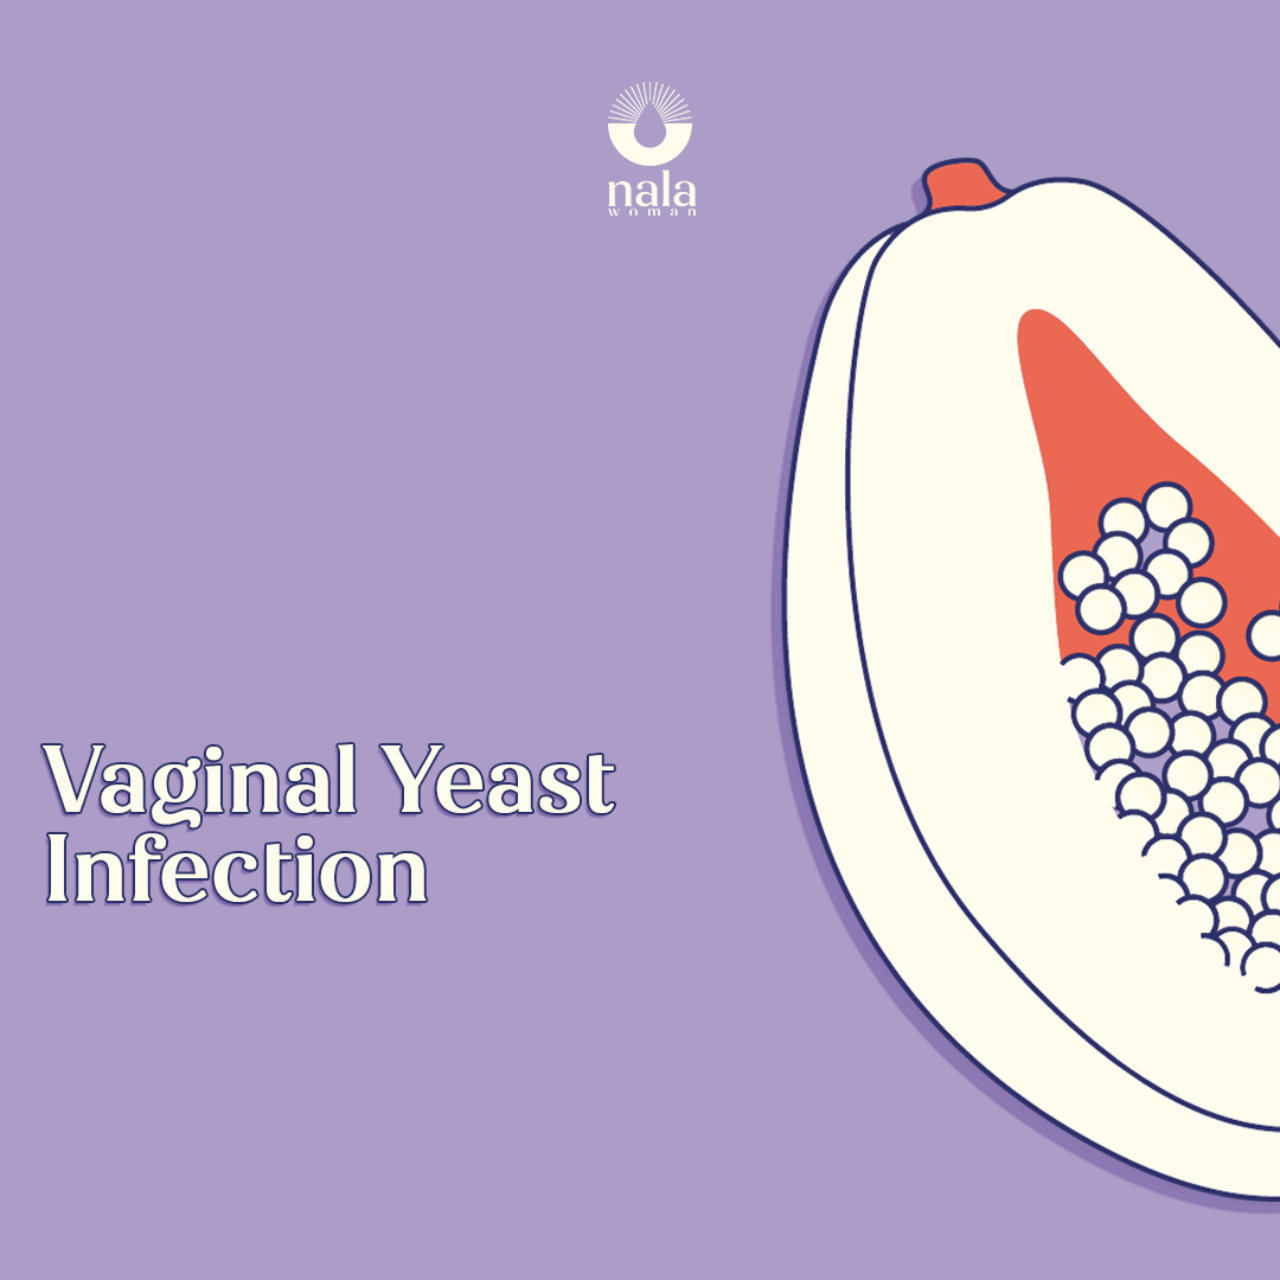 Vaginal Yeast Infection: Feeling itchy down there? 😥